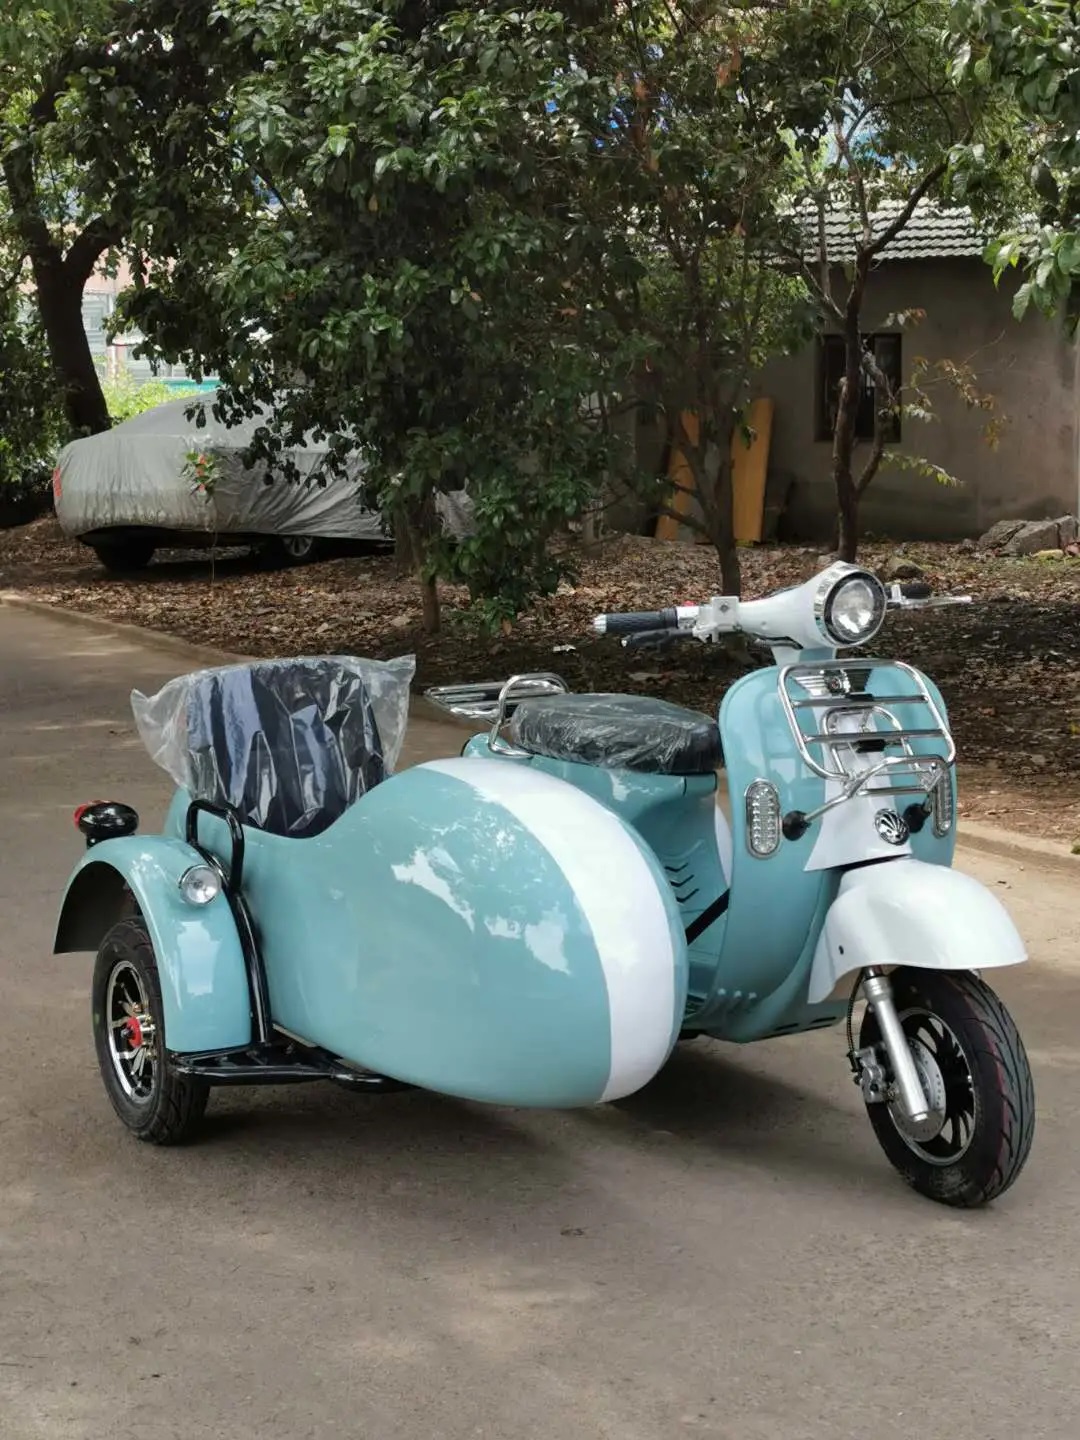 Adult-Cheap-Electric-Tricycle-Vespa-with-Sidecar.jpg